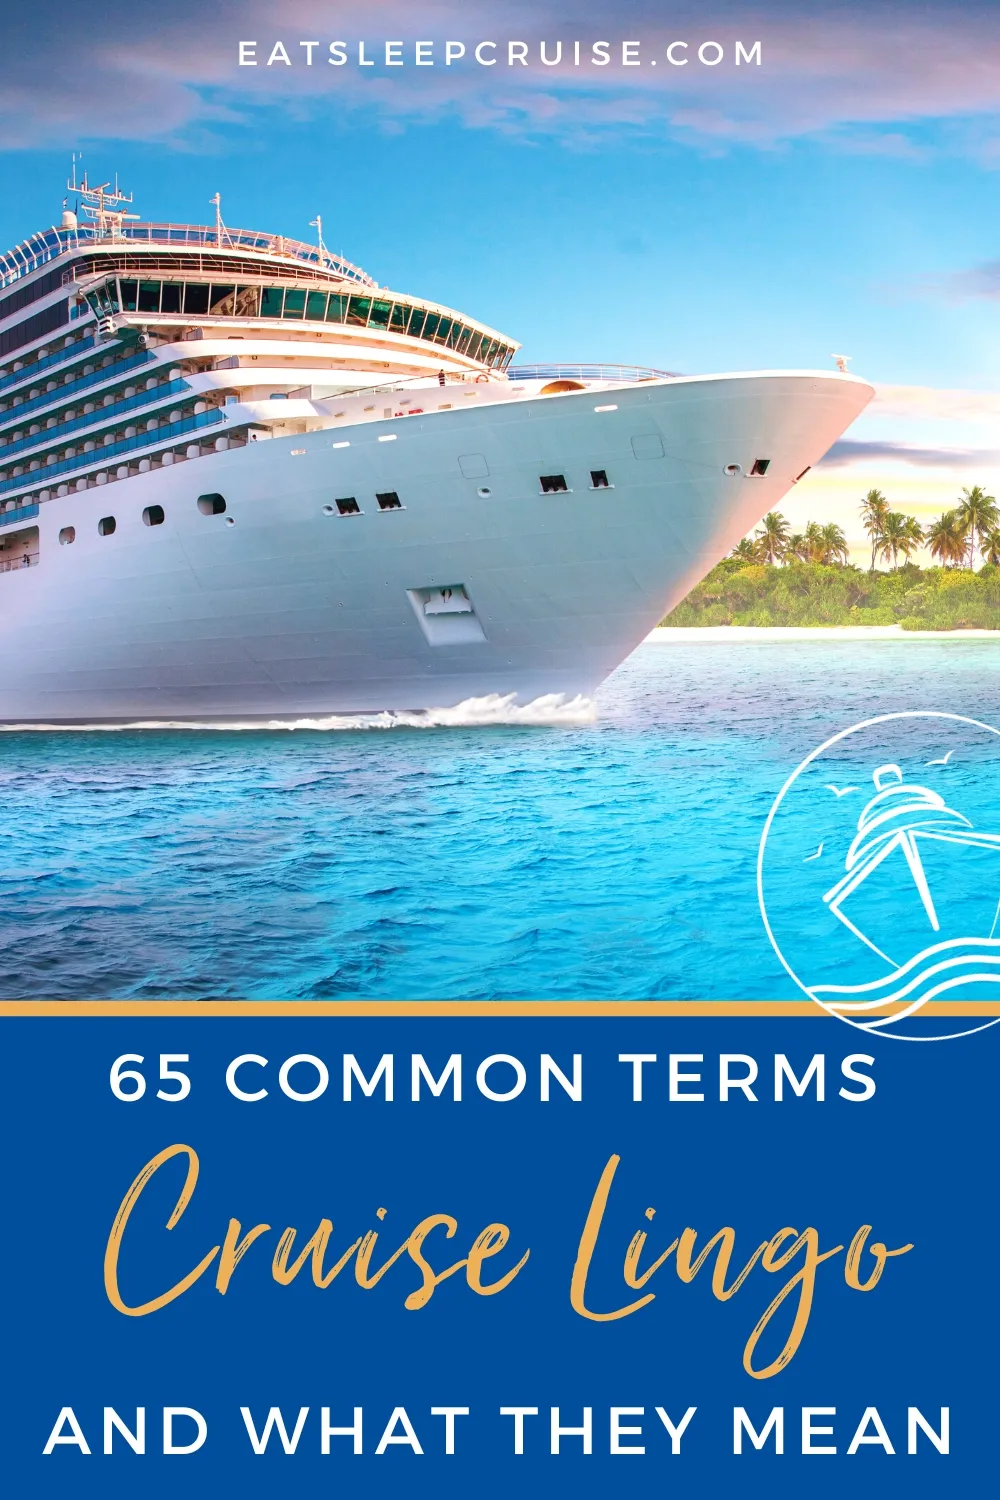 cruise card meaning